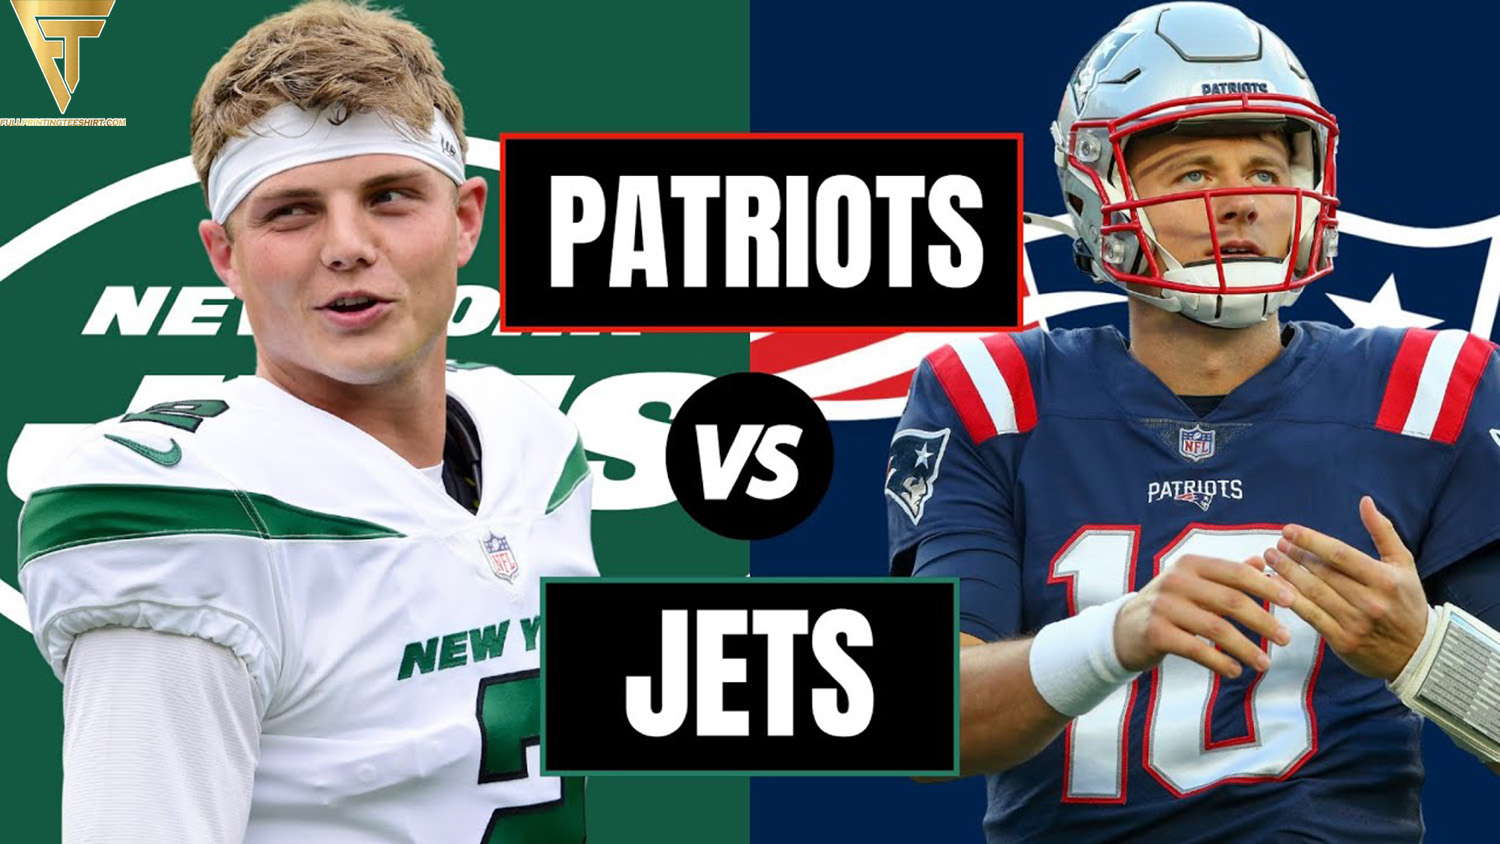 NFL Showdown New England Patriots vs. New York Jets - A Battle for Playoff Glory on January 8th, 2024, at Gillette Stadium